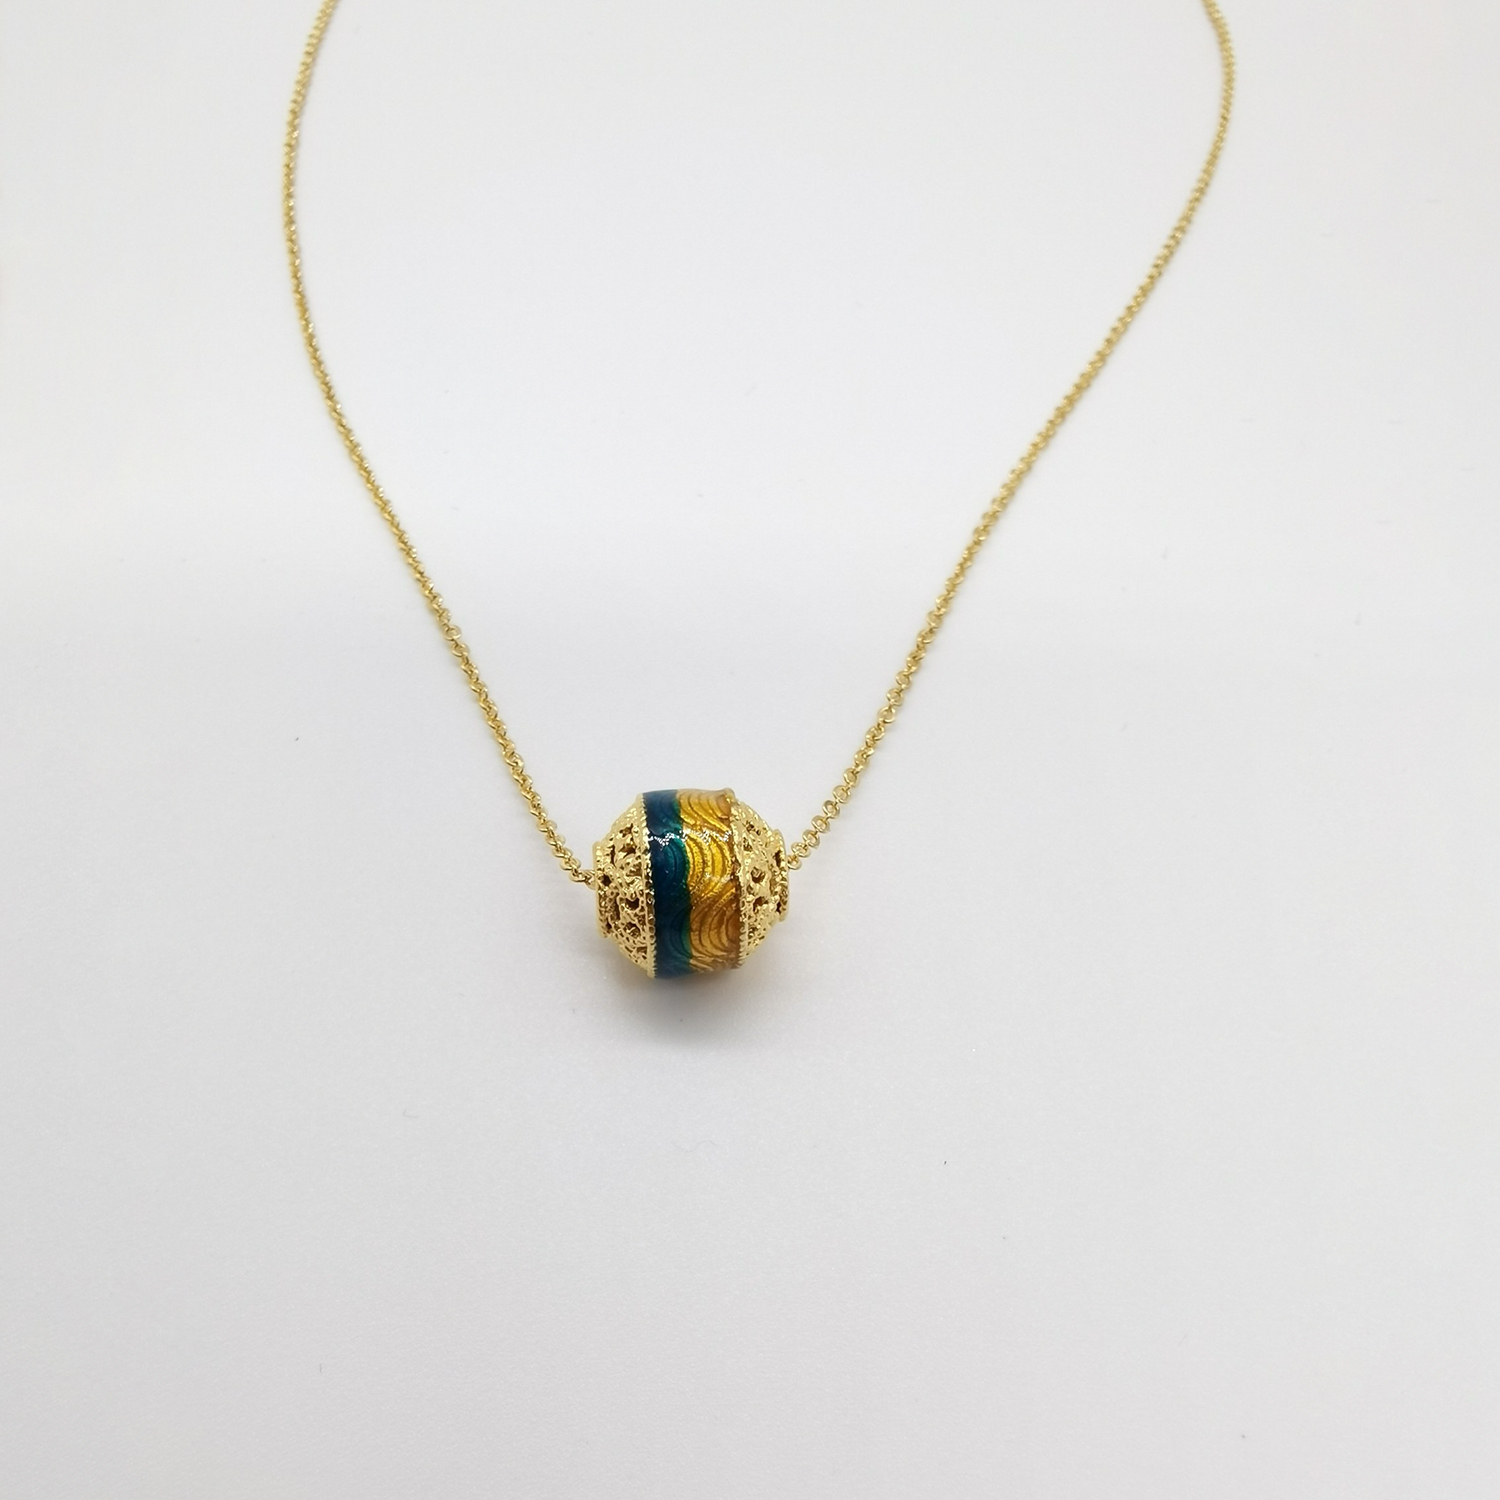 Alluvial gold ancient method vacuum electroplating 24K gold Qianli Jiangshan transfer bead necklace